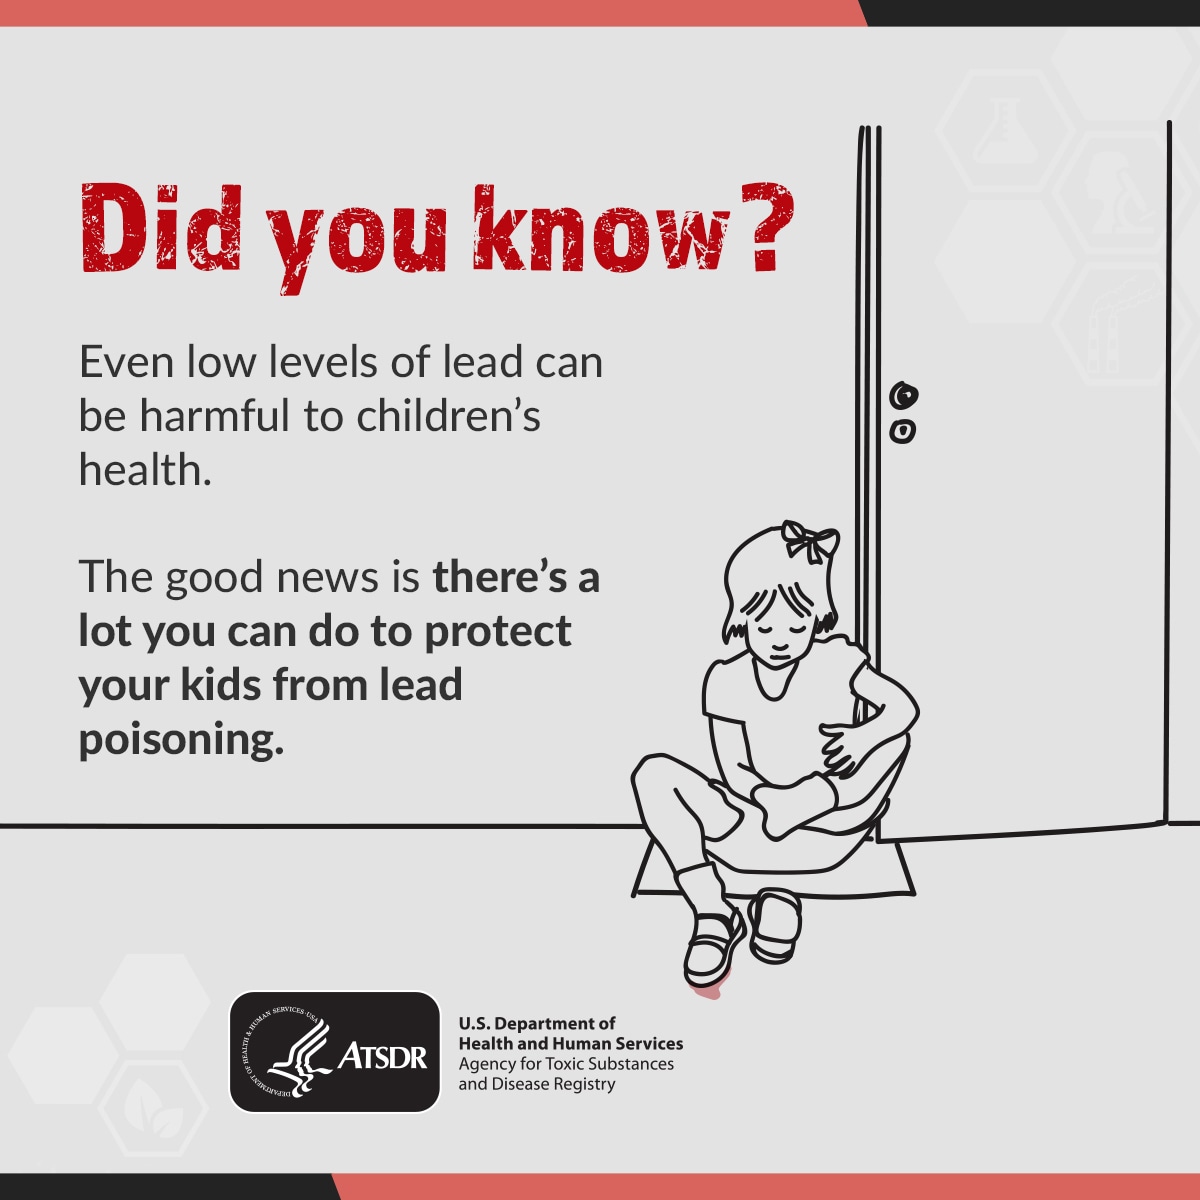 Even low levels of lead can be harmful to children's health. The good news is there's a lot you can do to protect your kids from lead poisoning.